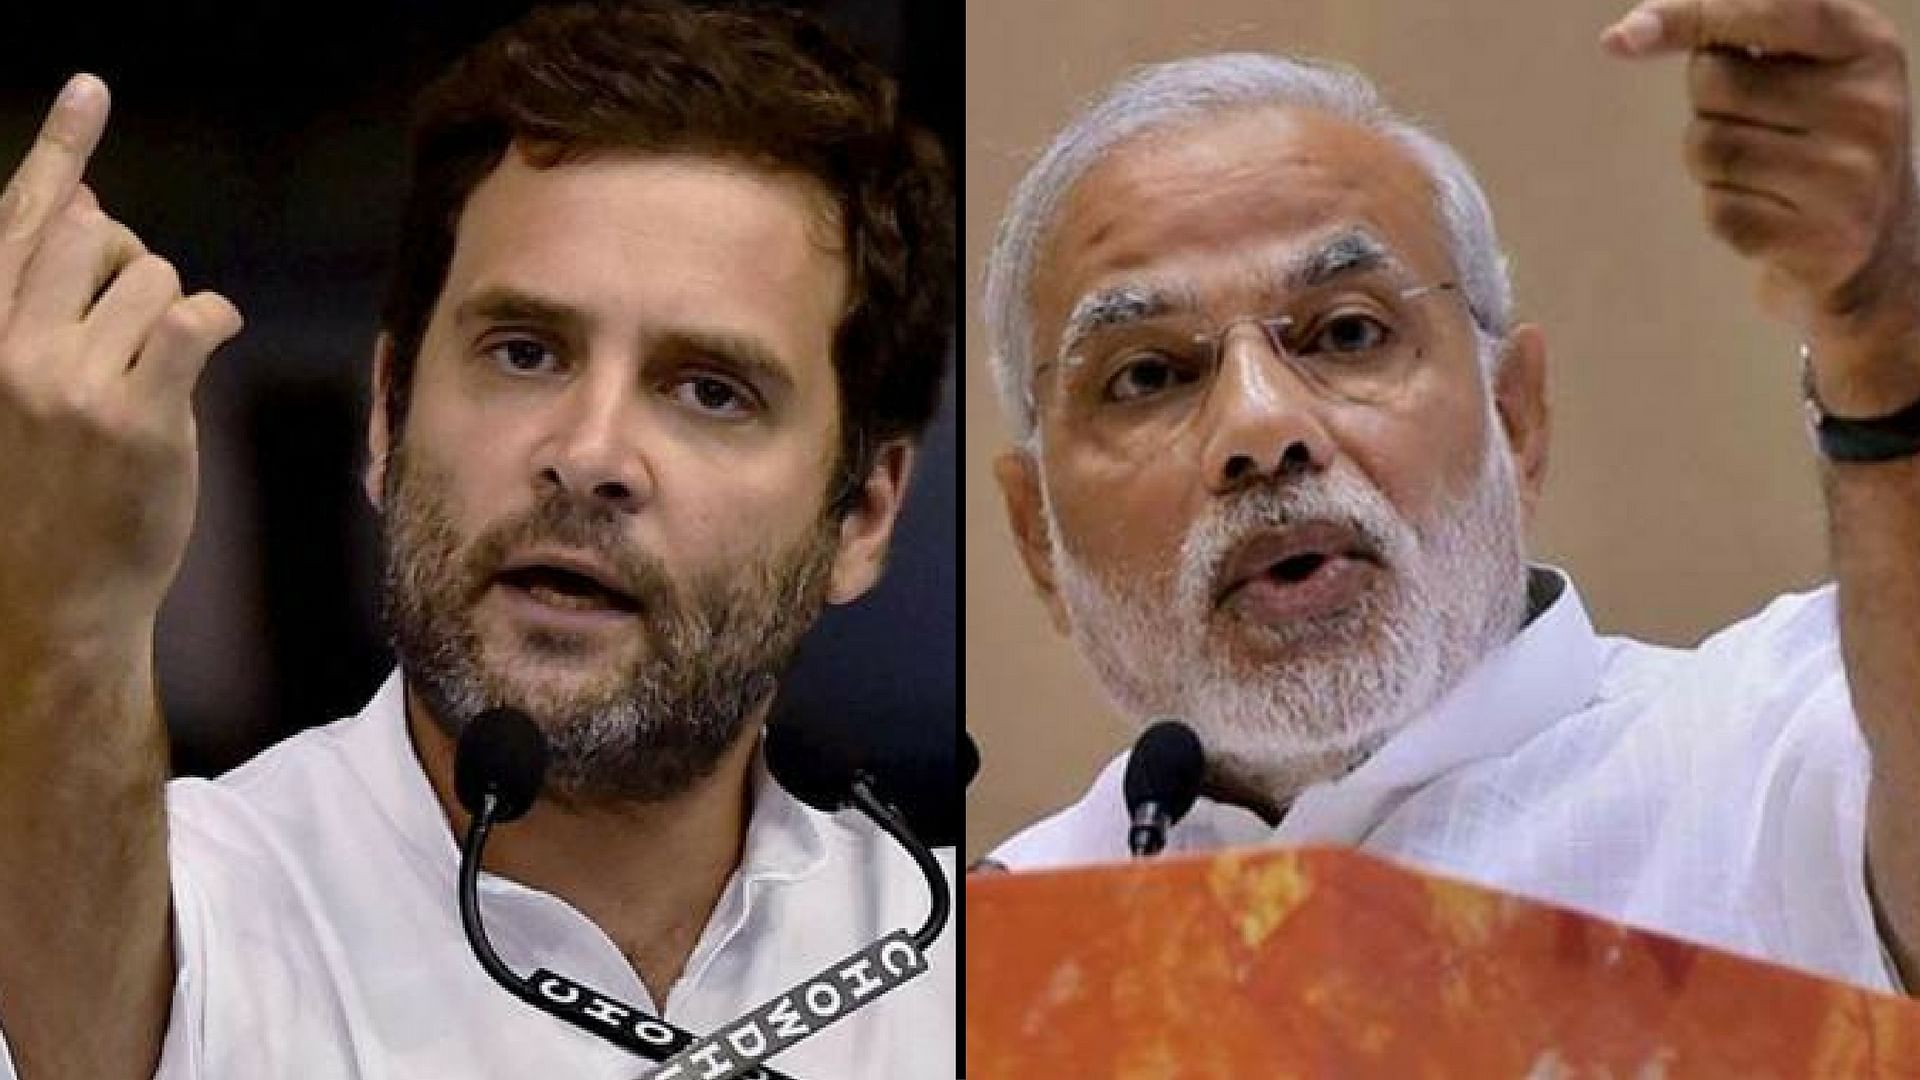 Congress leader Rahul Gandhi on Friday, 9 March, slammed Prime Minister Narendra Modi, tweeting that the shortage of vaccines amid the growing COVID-19 crisis was a “very serious problem” and not a “festival”.